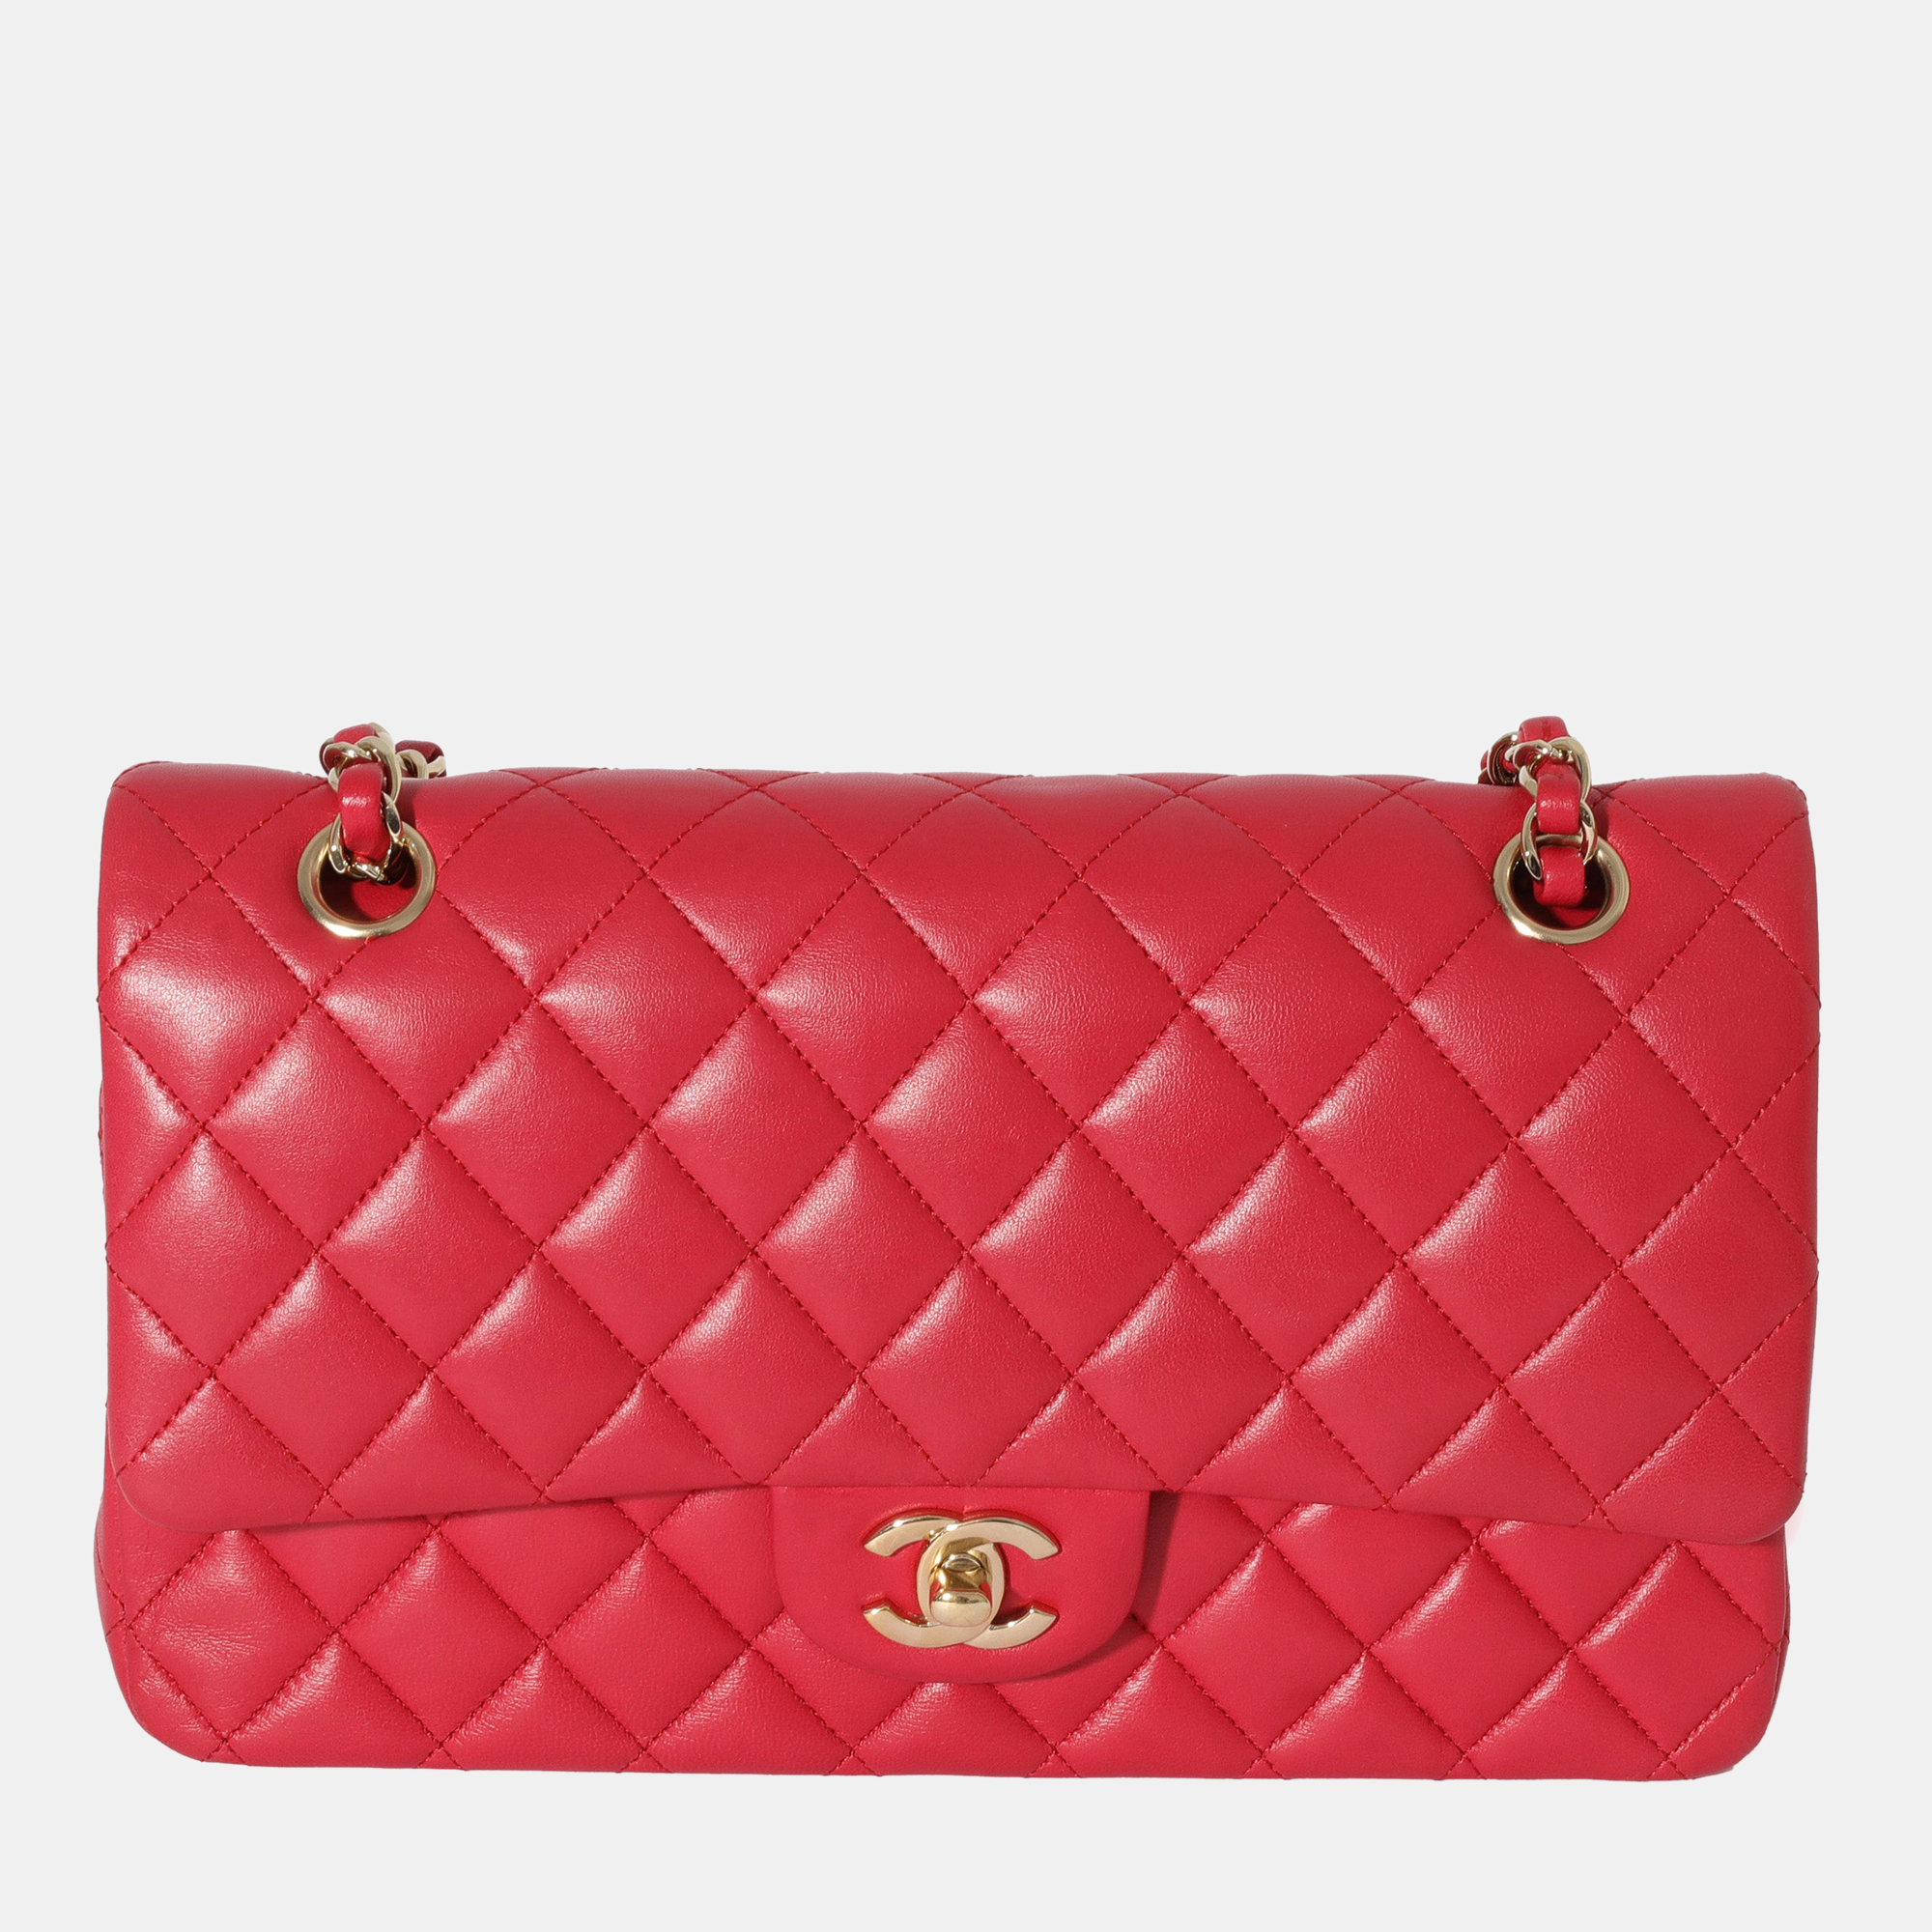 Pre-owned Chanel Red Quilted Leather Medium Classic Double Flap Shoulder Bag